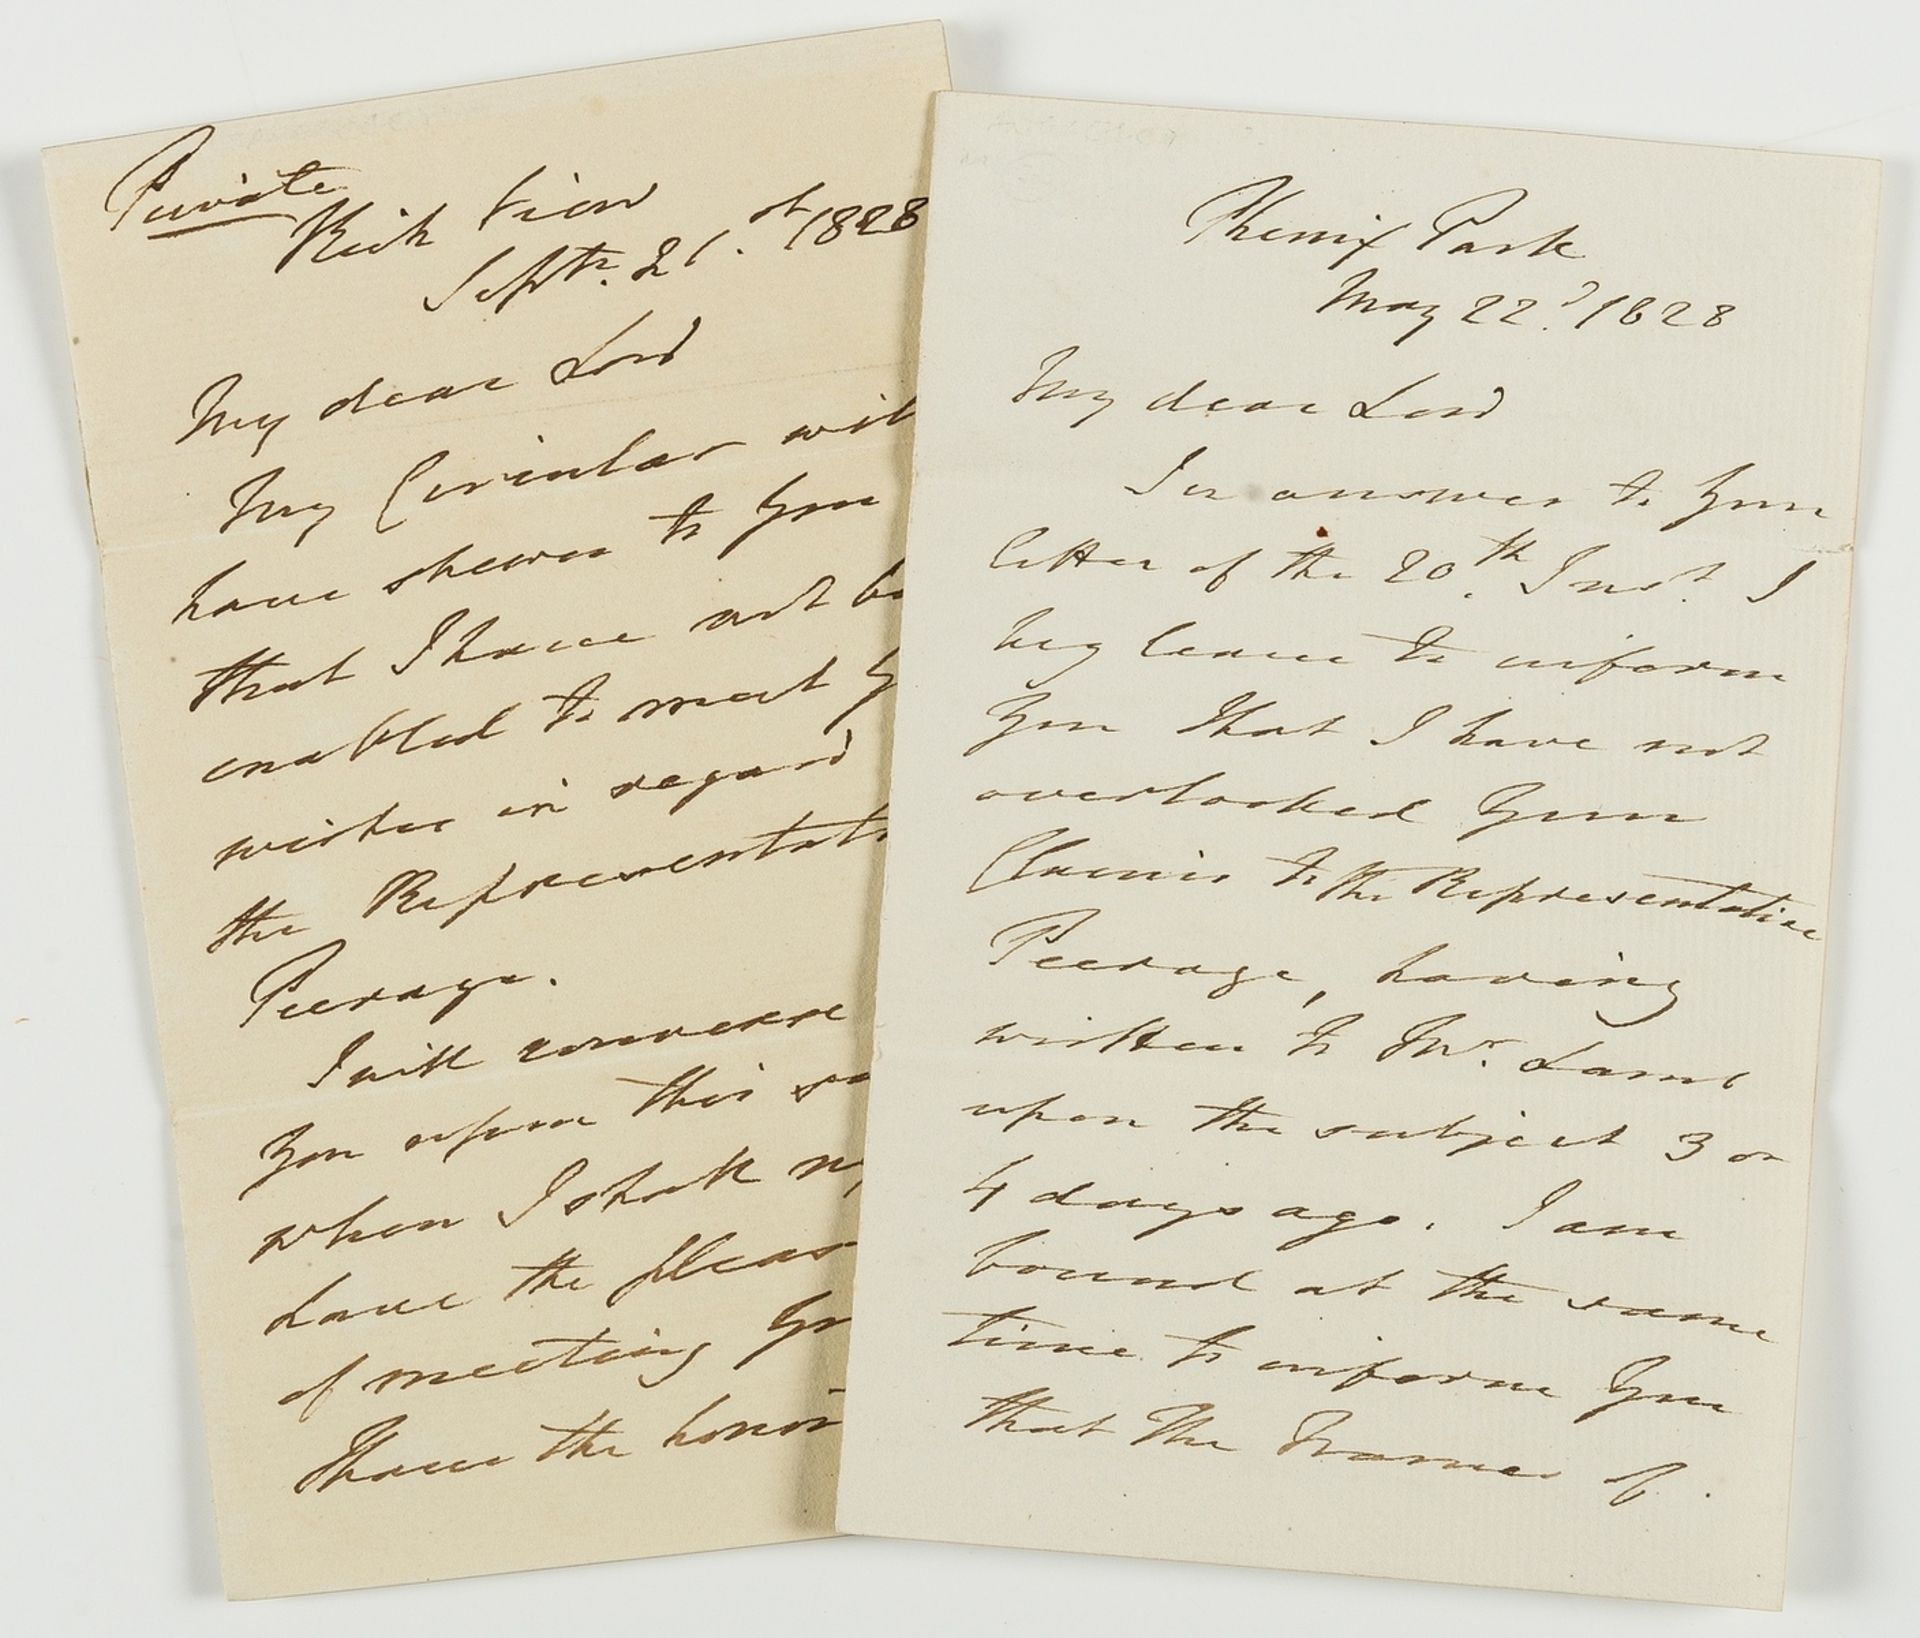 Uxbridge (Henry Paget, first Earl of Uxbridge) 2 Autograph Letters signed to the Marquis of …